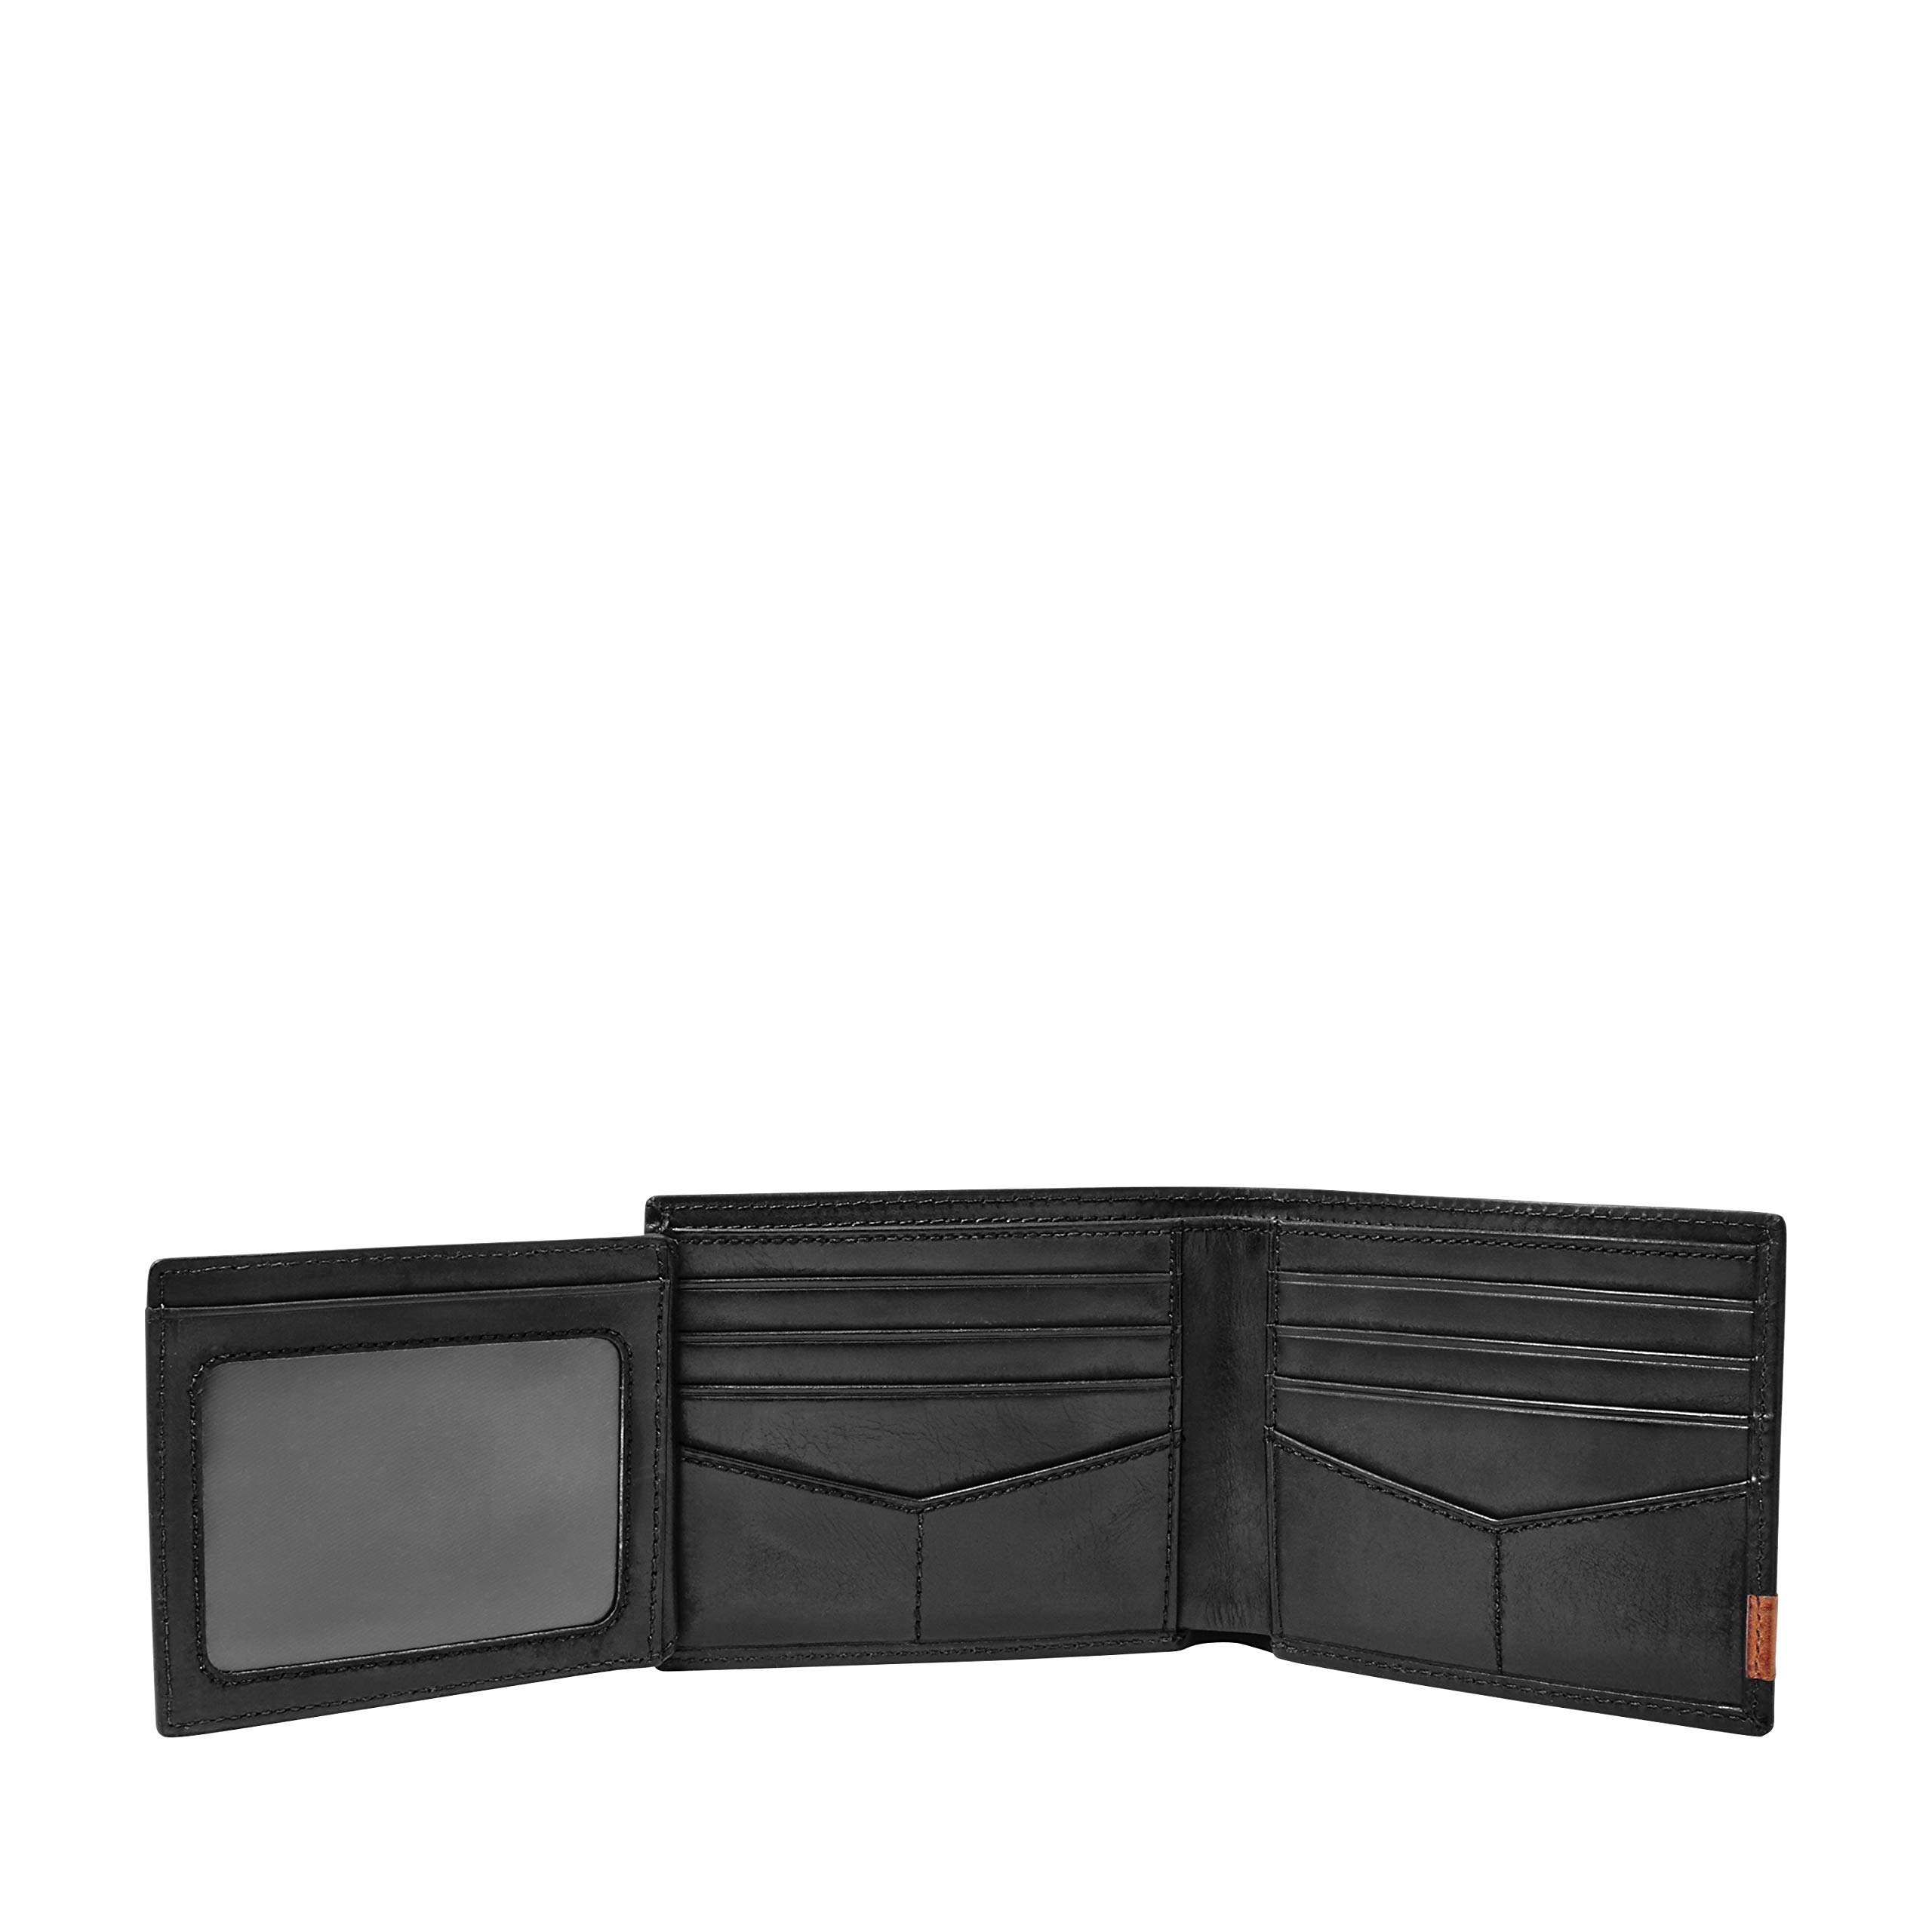 Fossil Men's Leather Bifold Wallet with Flip ID Window for Men